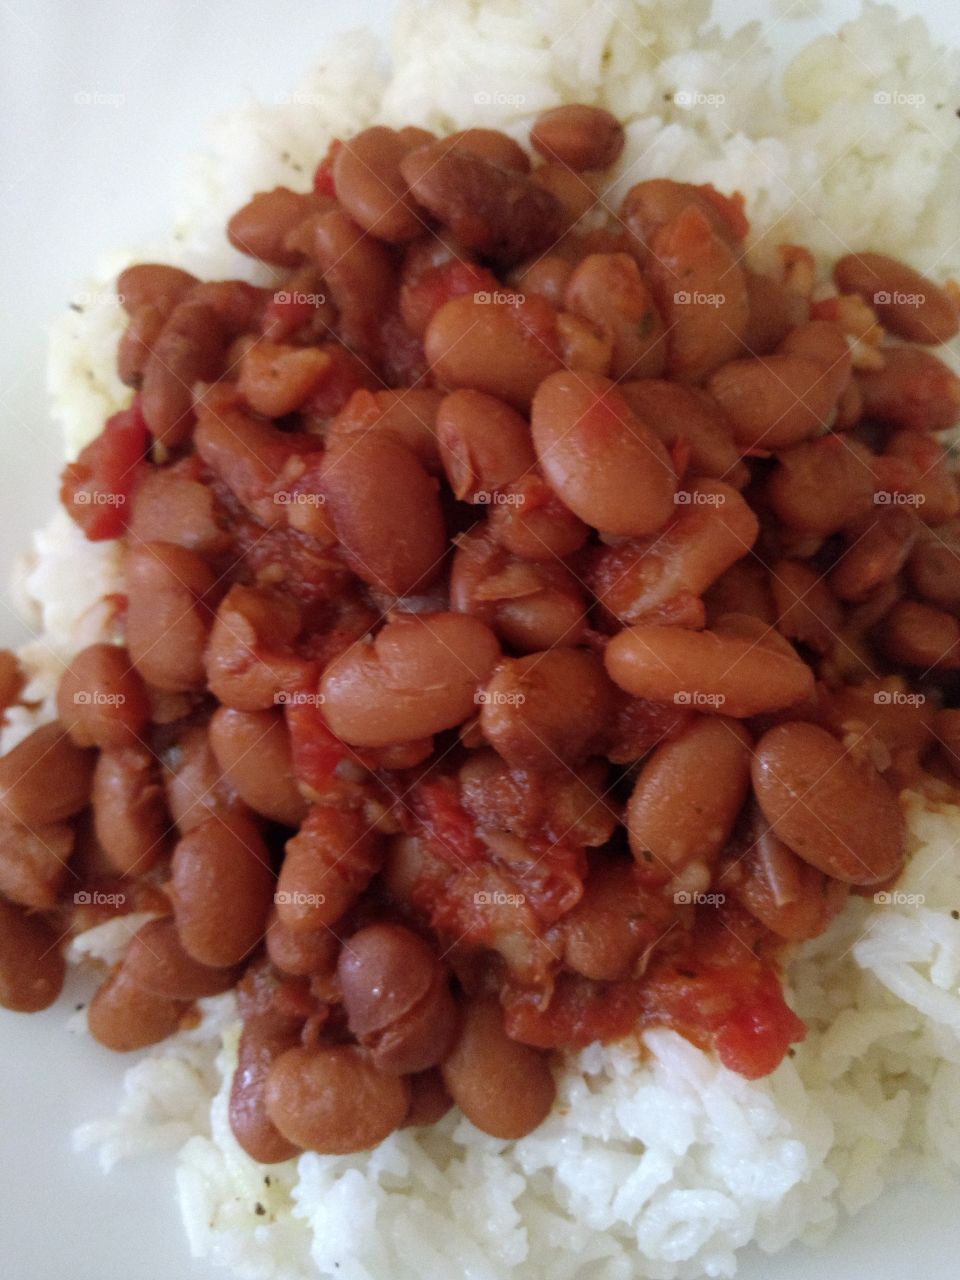 Puerto Rican Red beans and rice